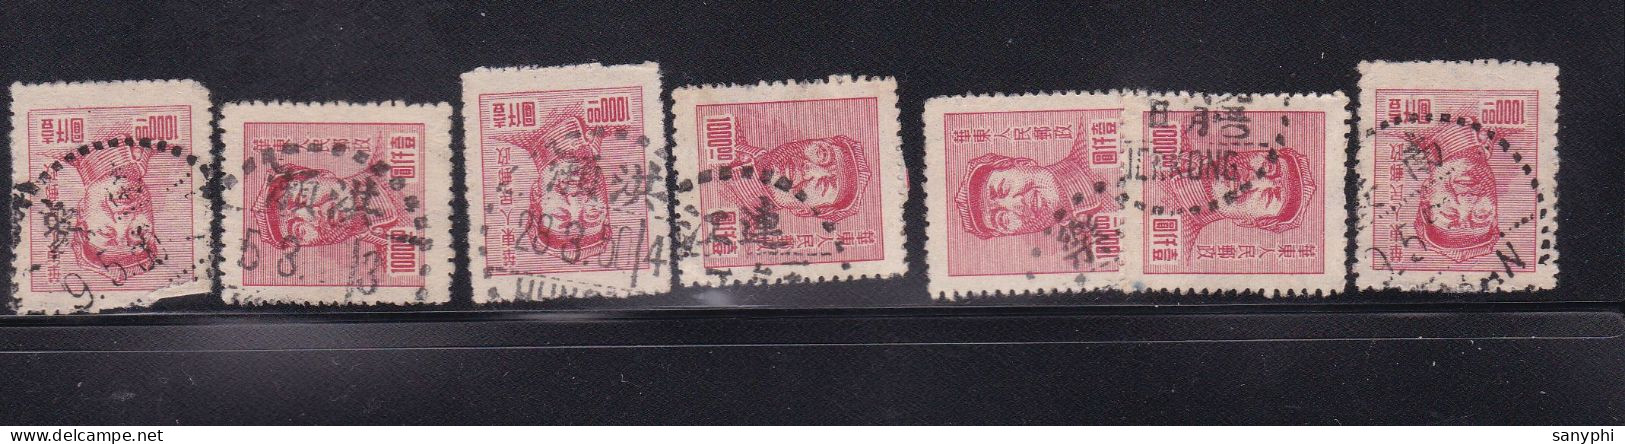 East China 1949 Mao 1000Yuan,7 Used Stamps - Ungebraucht